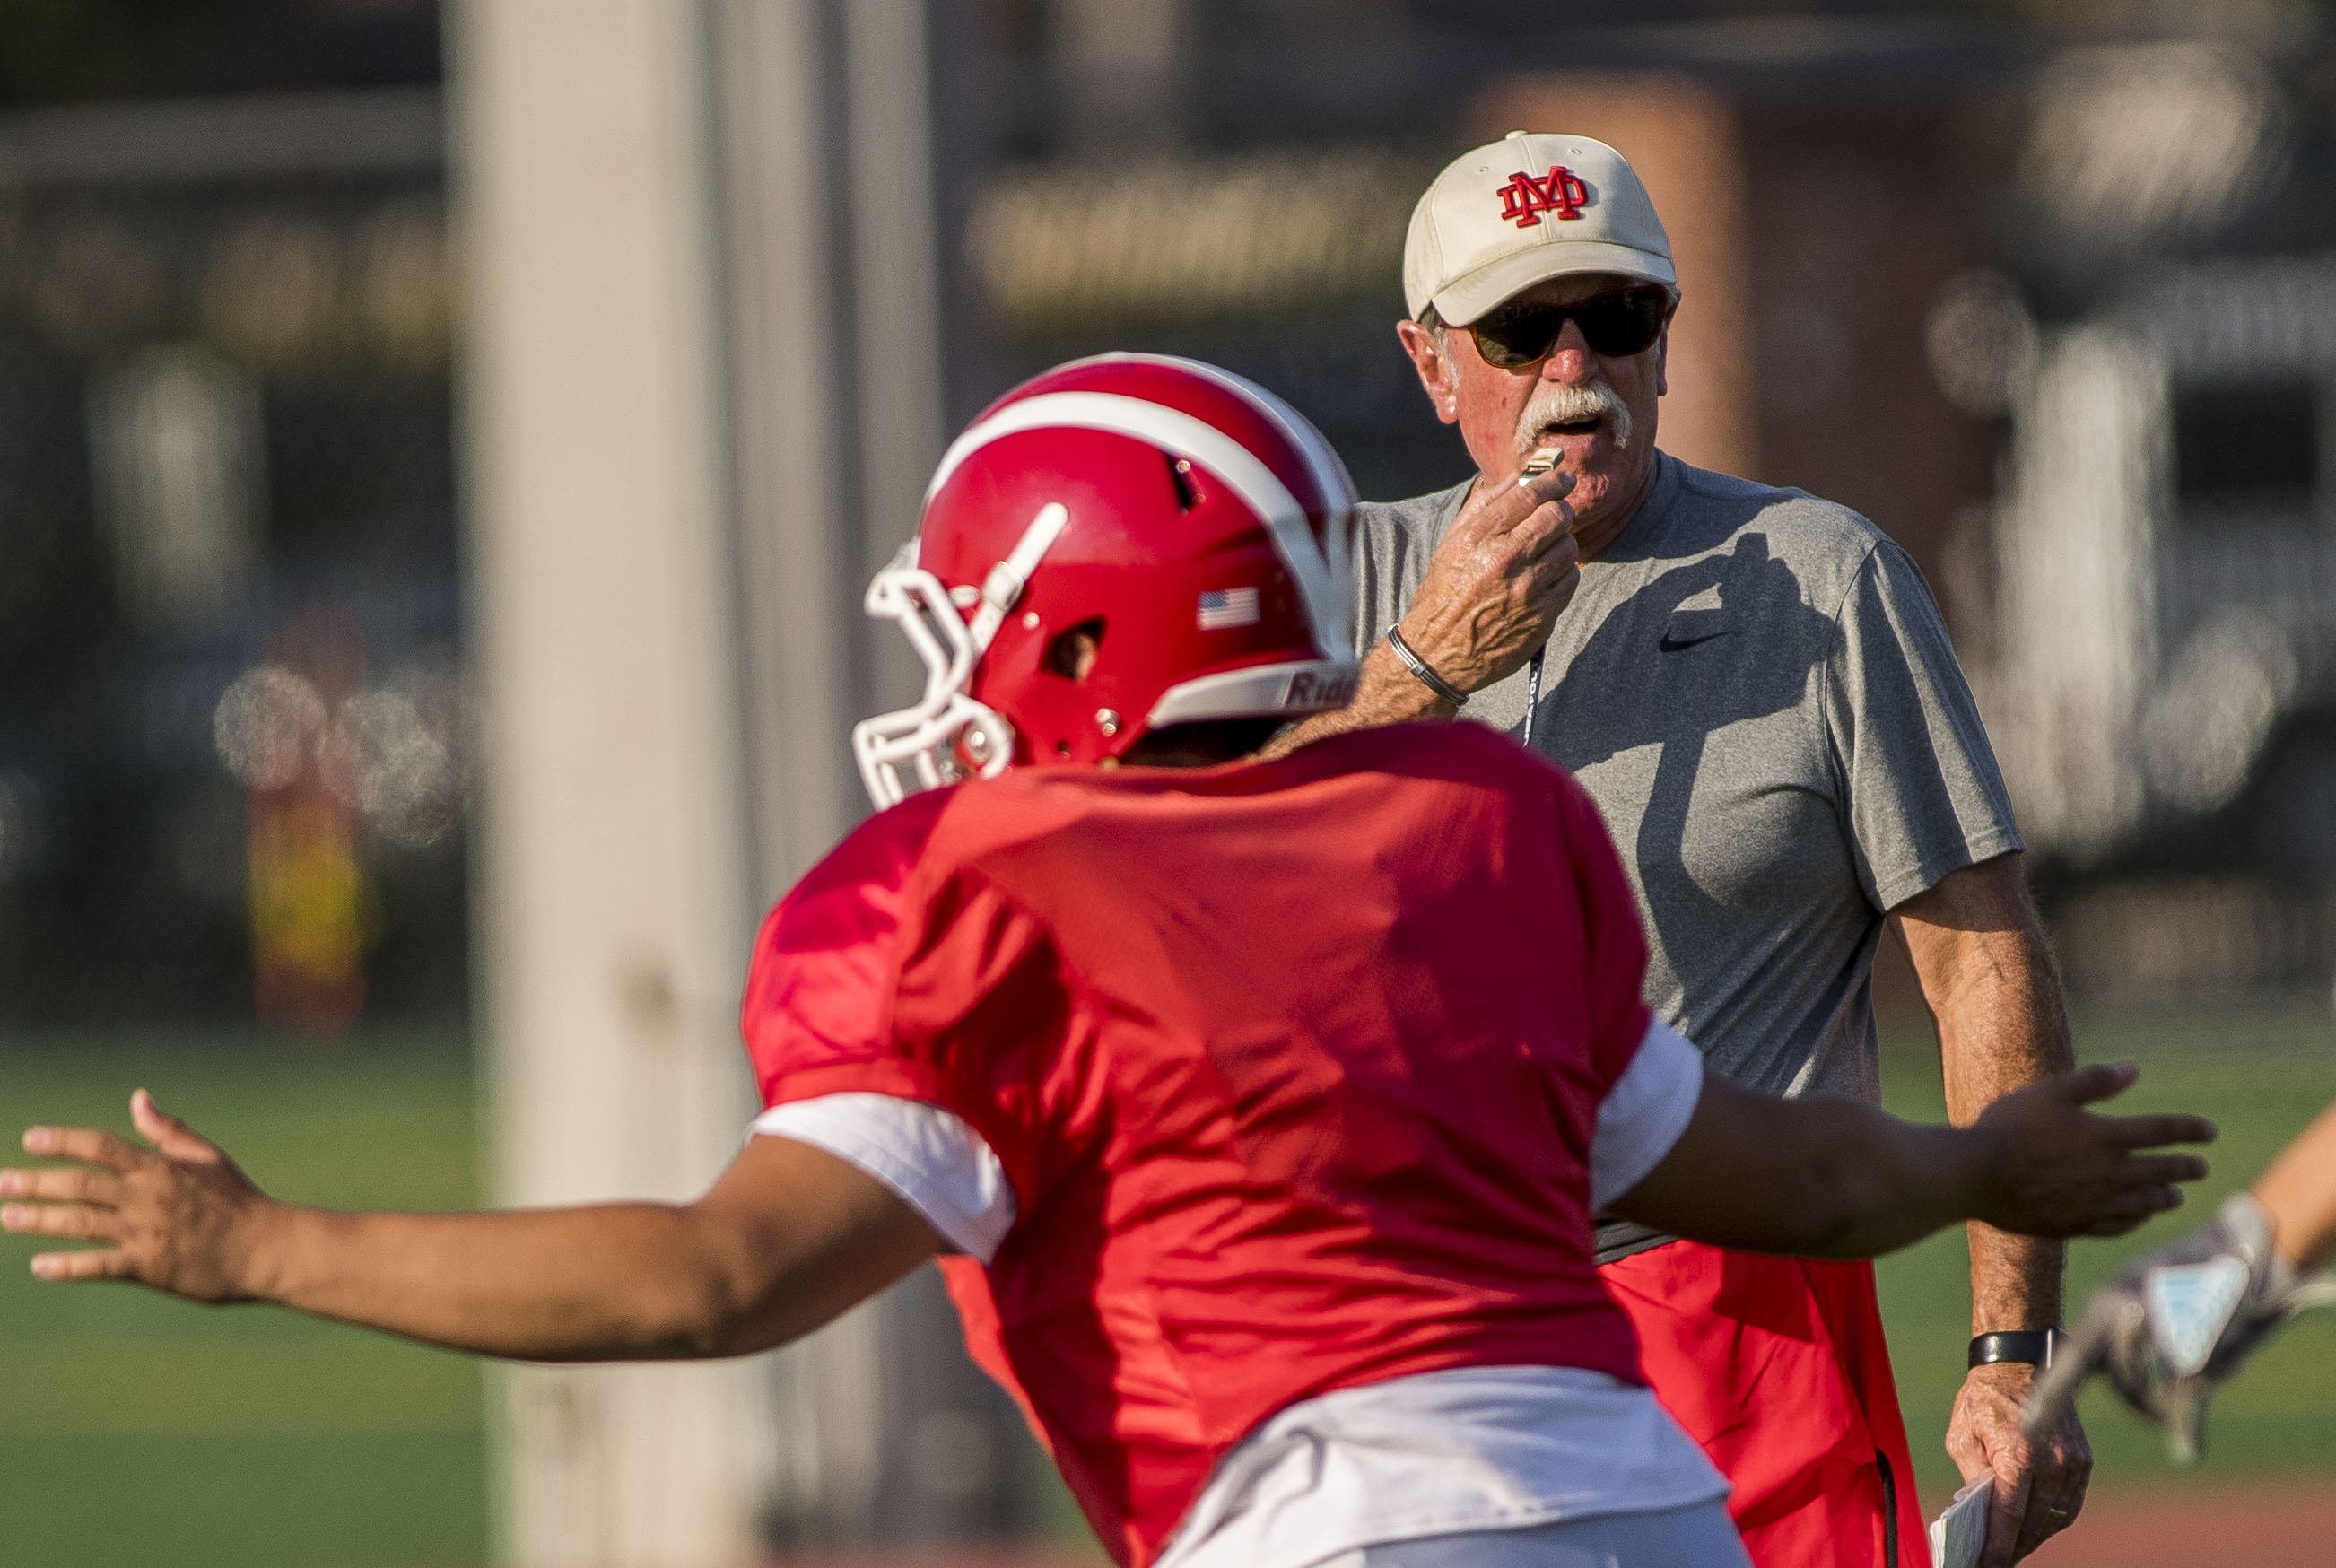 Mater Dei High School football coach Bruce Rollinson watches his players as they run through drills during practice in Santa Ana on Tuesday, August 29, 2017. (Photo by Paul Rodriguez, Orange County Register/SCNG)